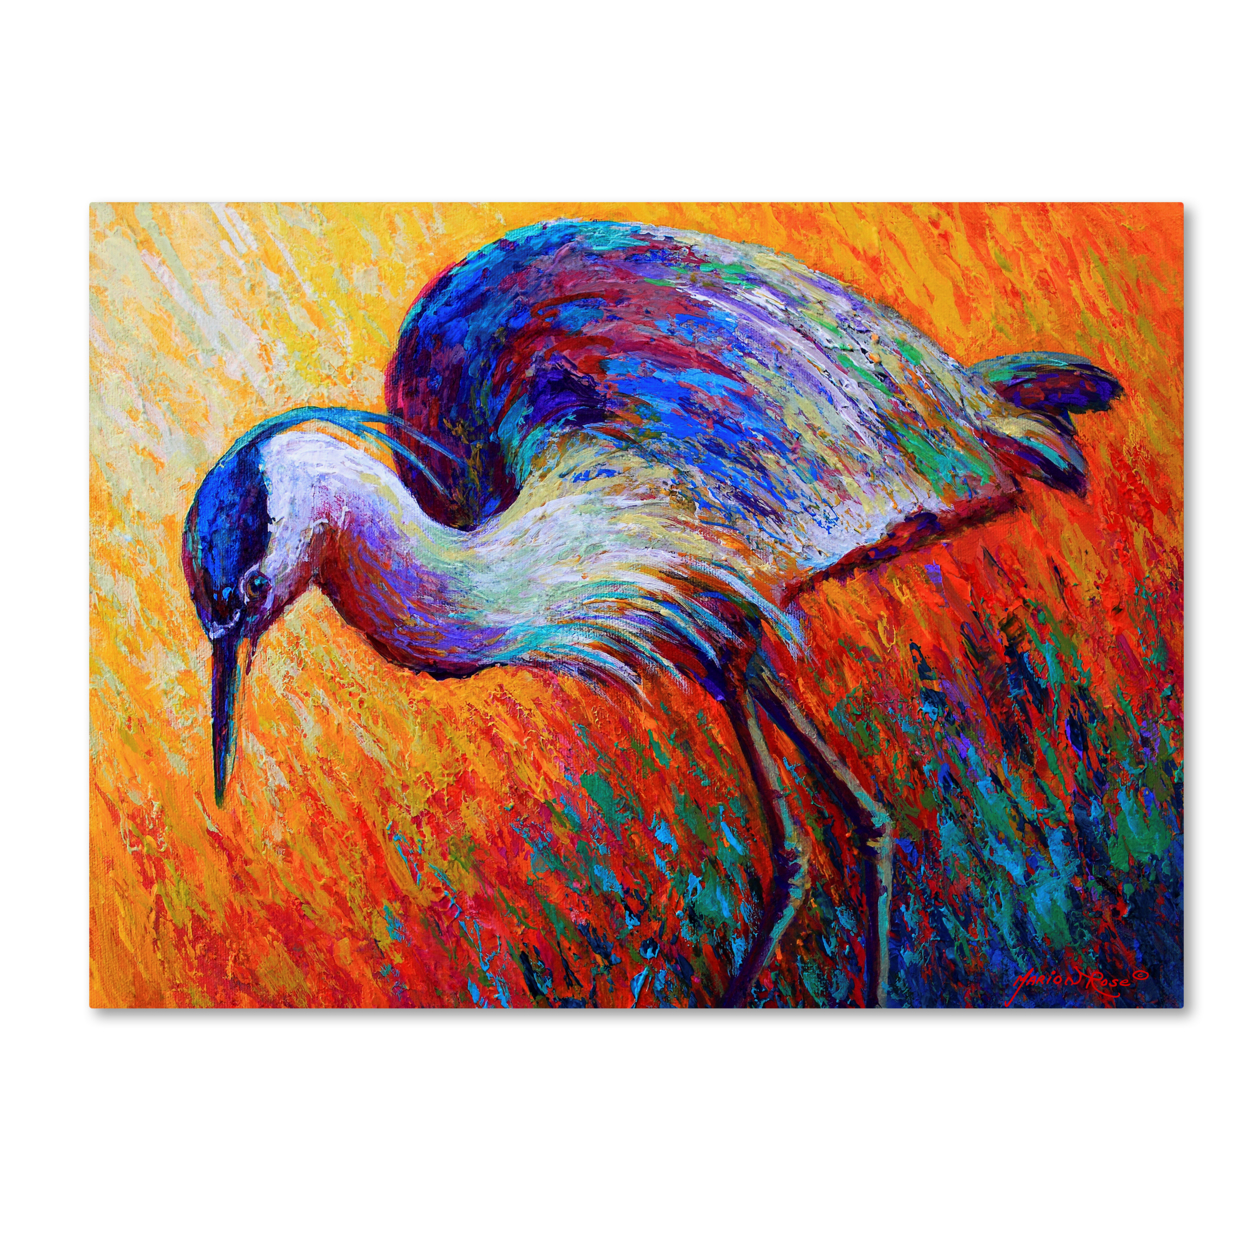 Marion Rose 'Bird Of Dreams' Ready To Hang Canvas Art 35 X 47 Inches Made In USA